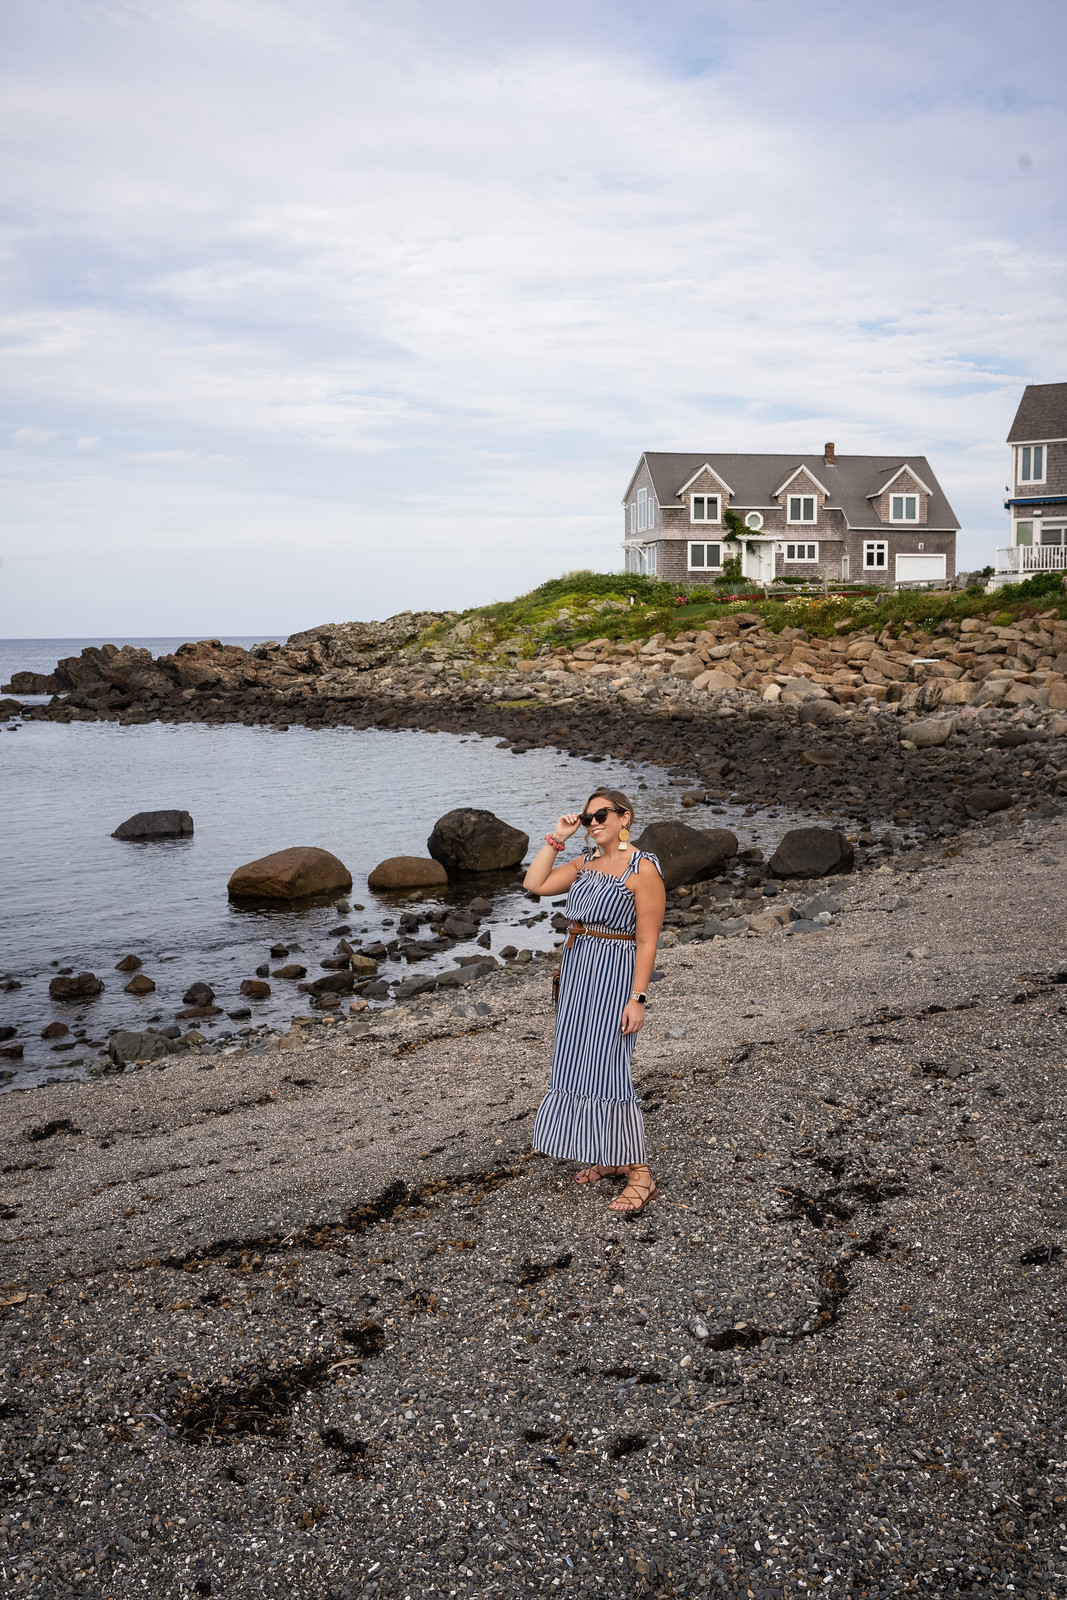 Perkins Cove Beach in Ogunquit, Maine | New England Road Trip Itinerary - New England Road Trip - The Ultimate 7 Day Itinerary - The Perfect Summer New England Road Trip Itinerary